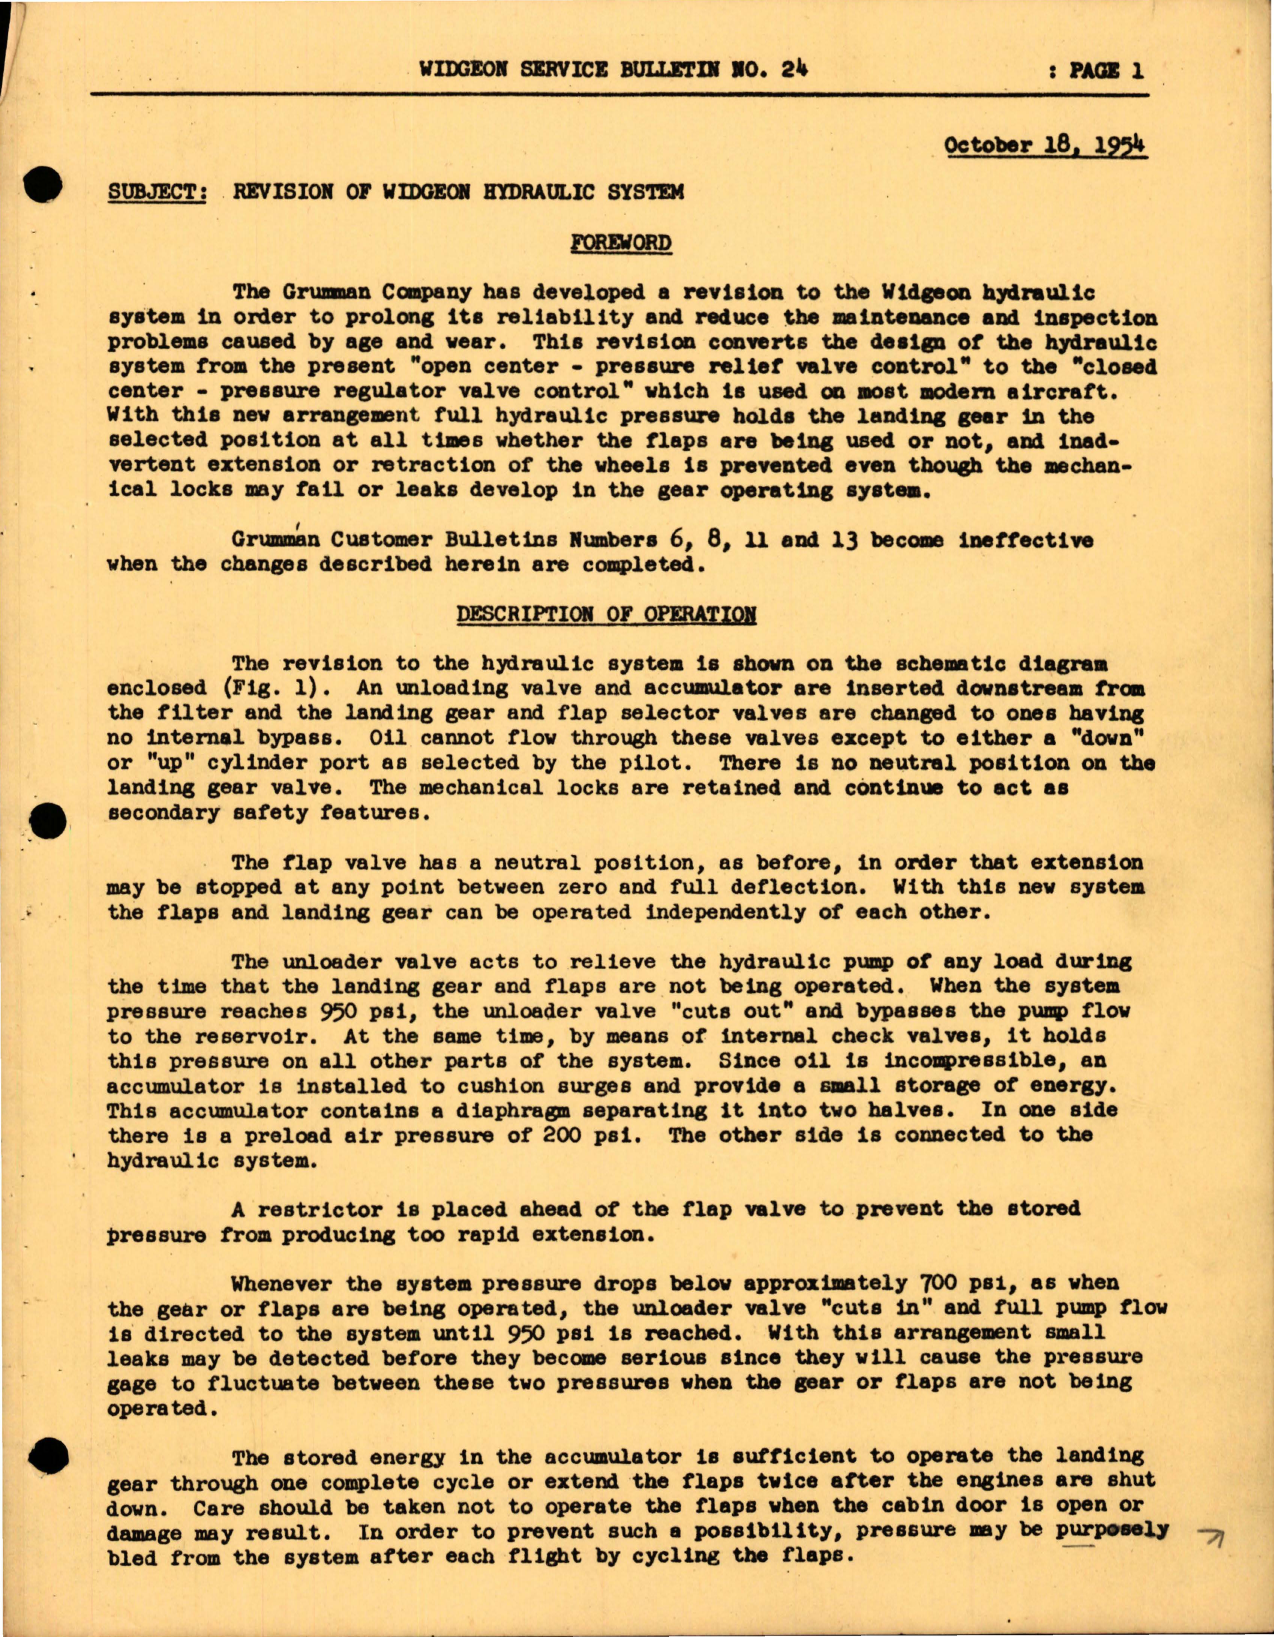 Sample page 1 from AirCorps Library document: Revision of Widgeon Hydraulic System